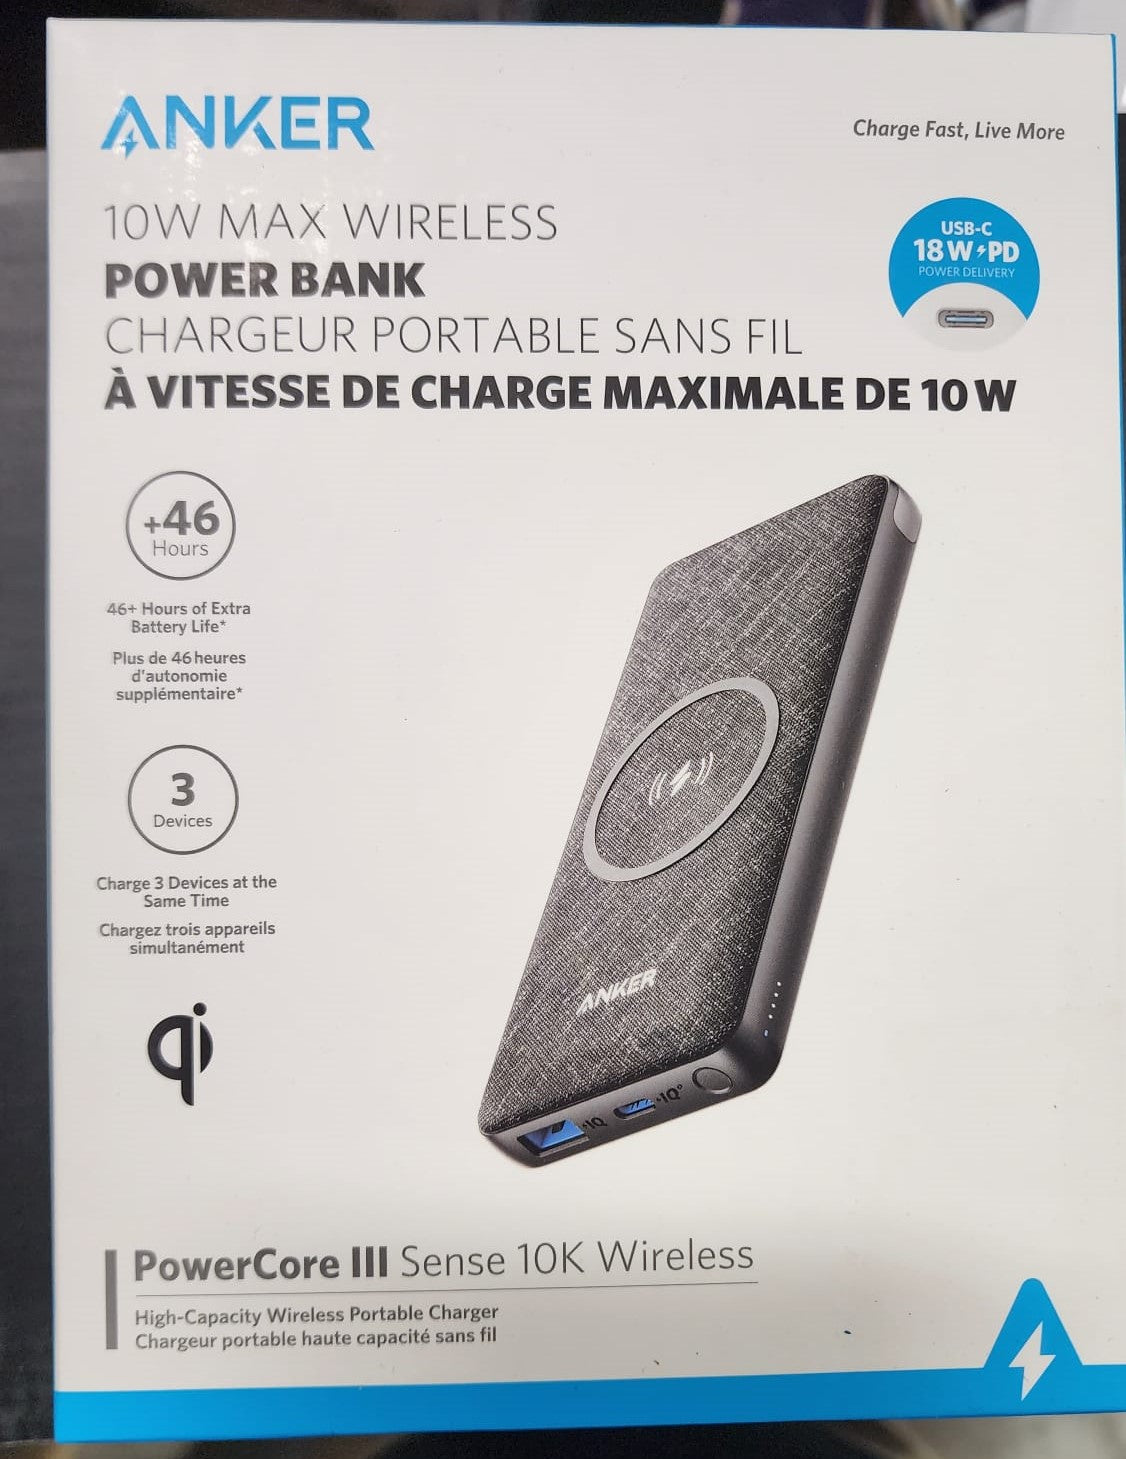 ANKER PowerCore III 10K Wireless Portable Charger